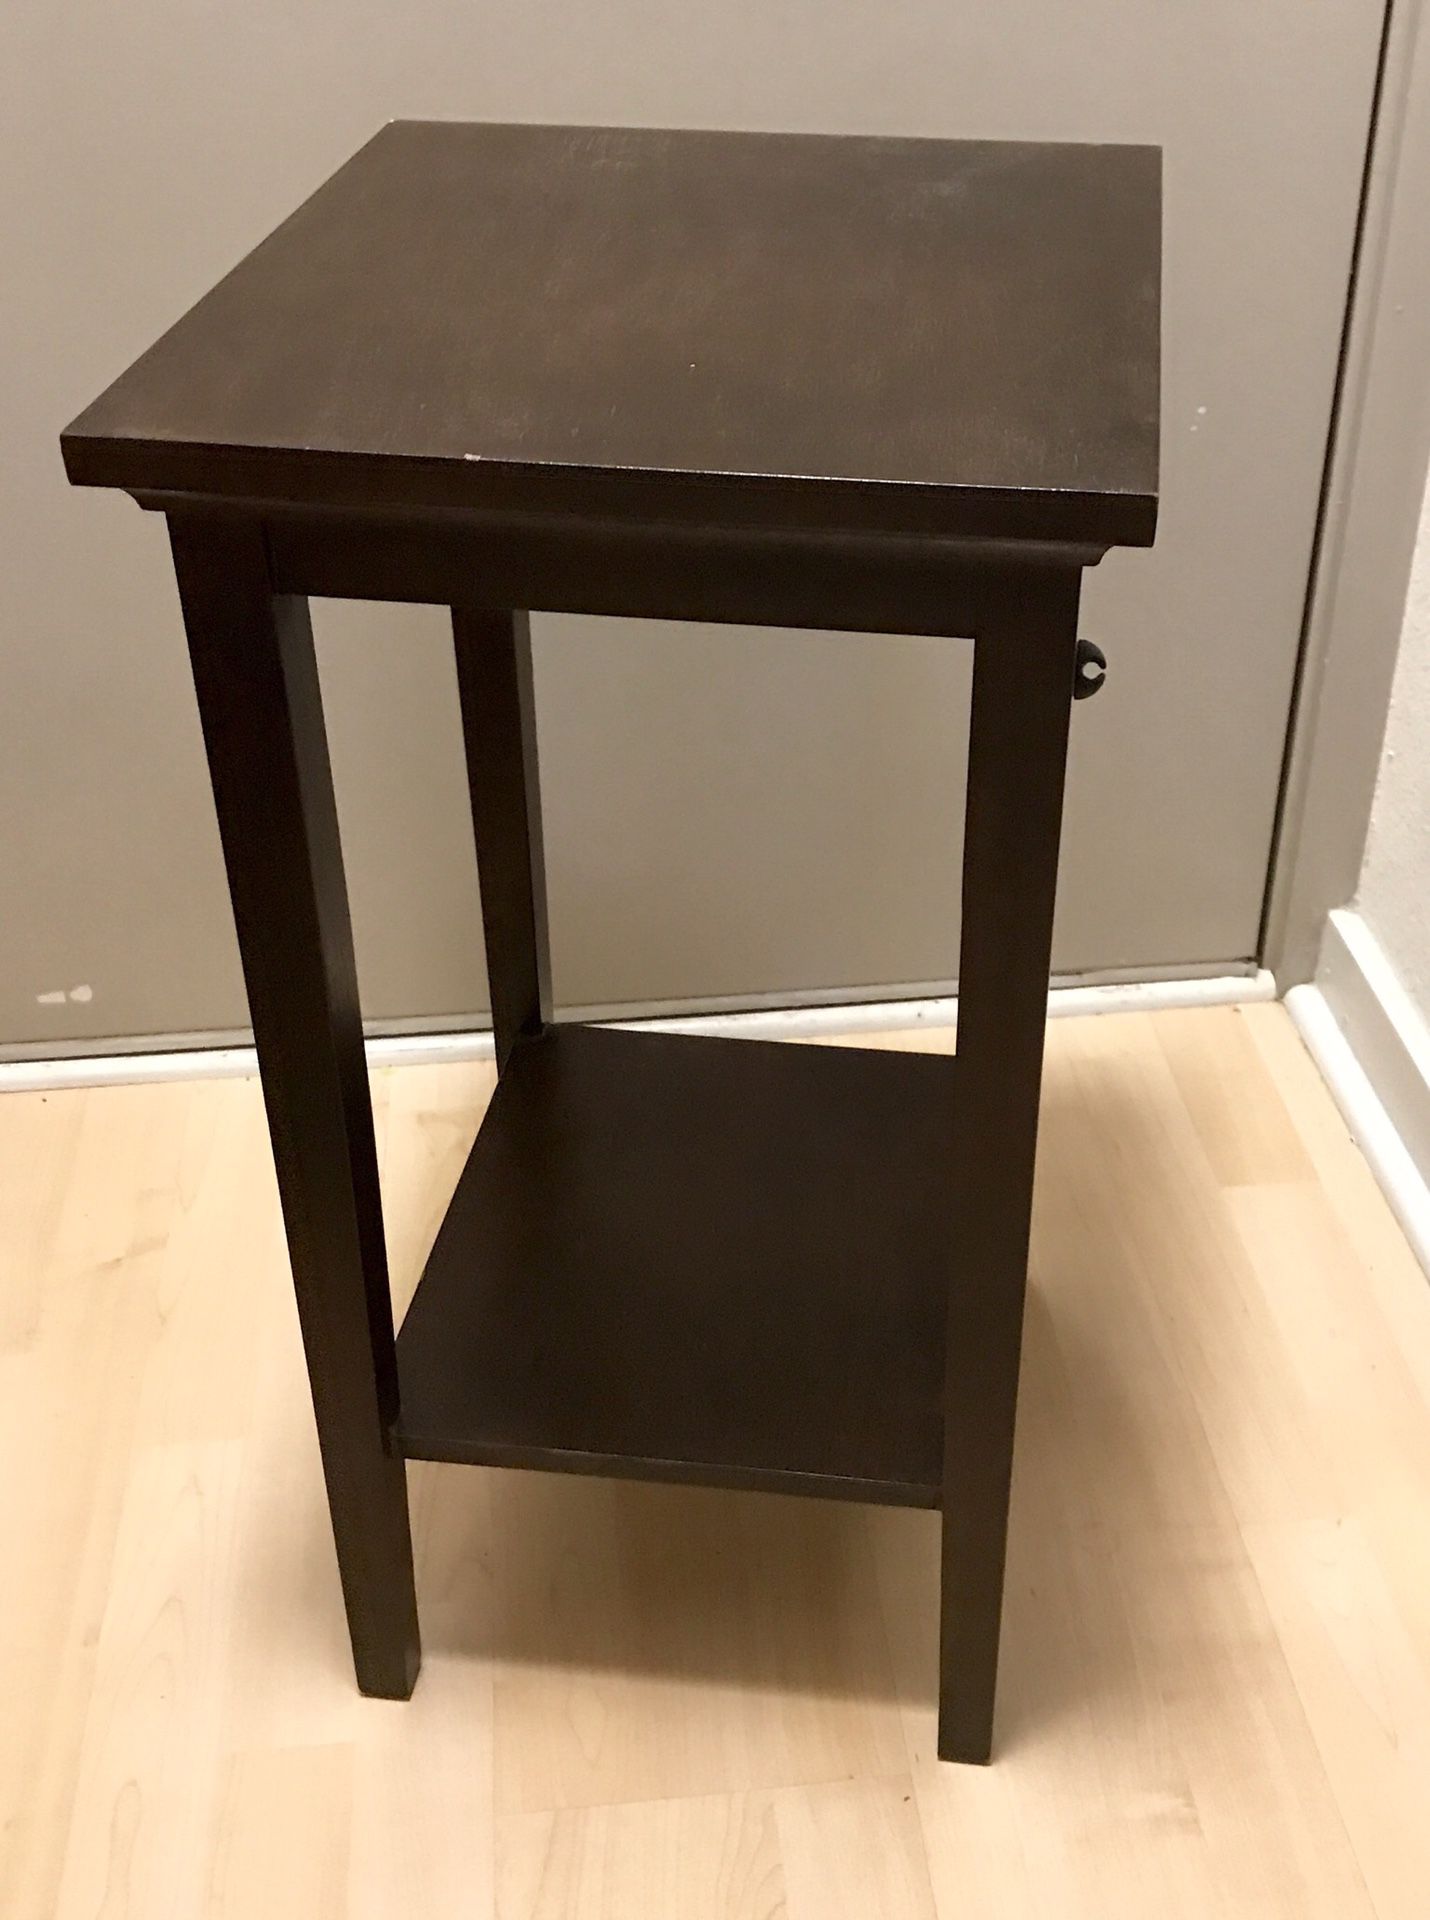 Wooden Console / Side Table - 24” x 15” x 13.5”